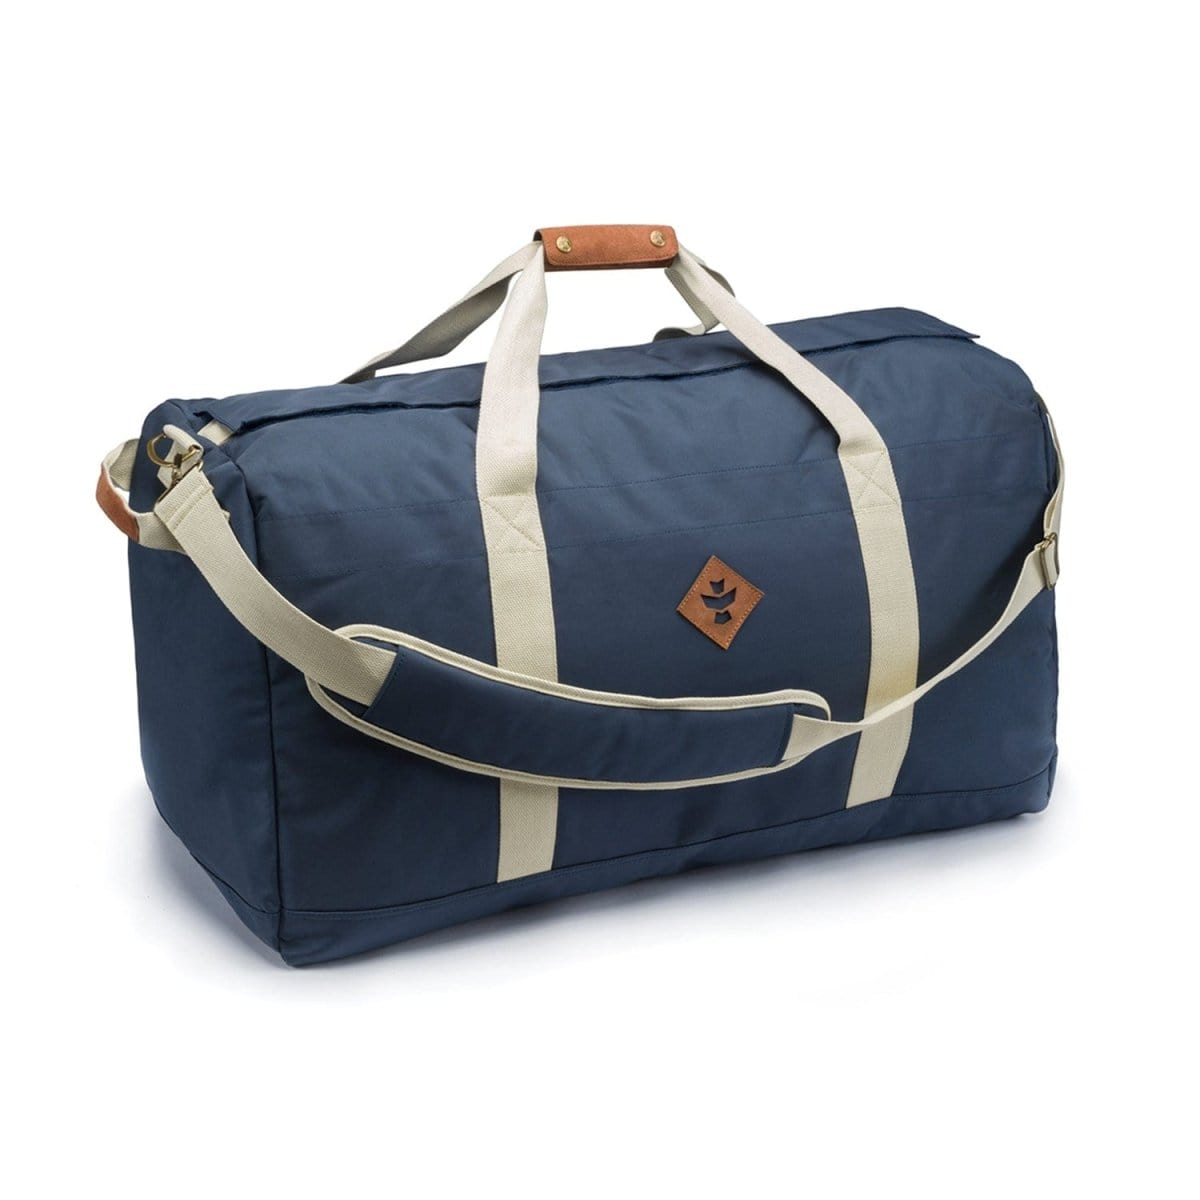 Revelry Supply Travel Bag Navy Blue The Continental - Smell Proof Large Duffle